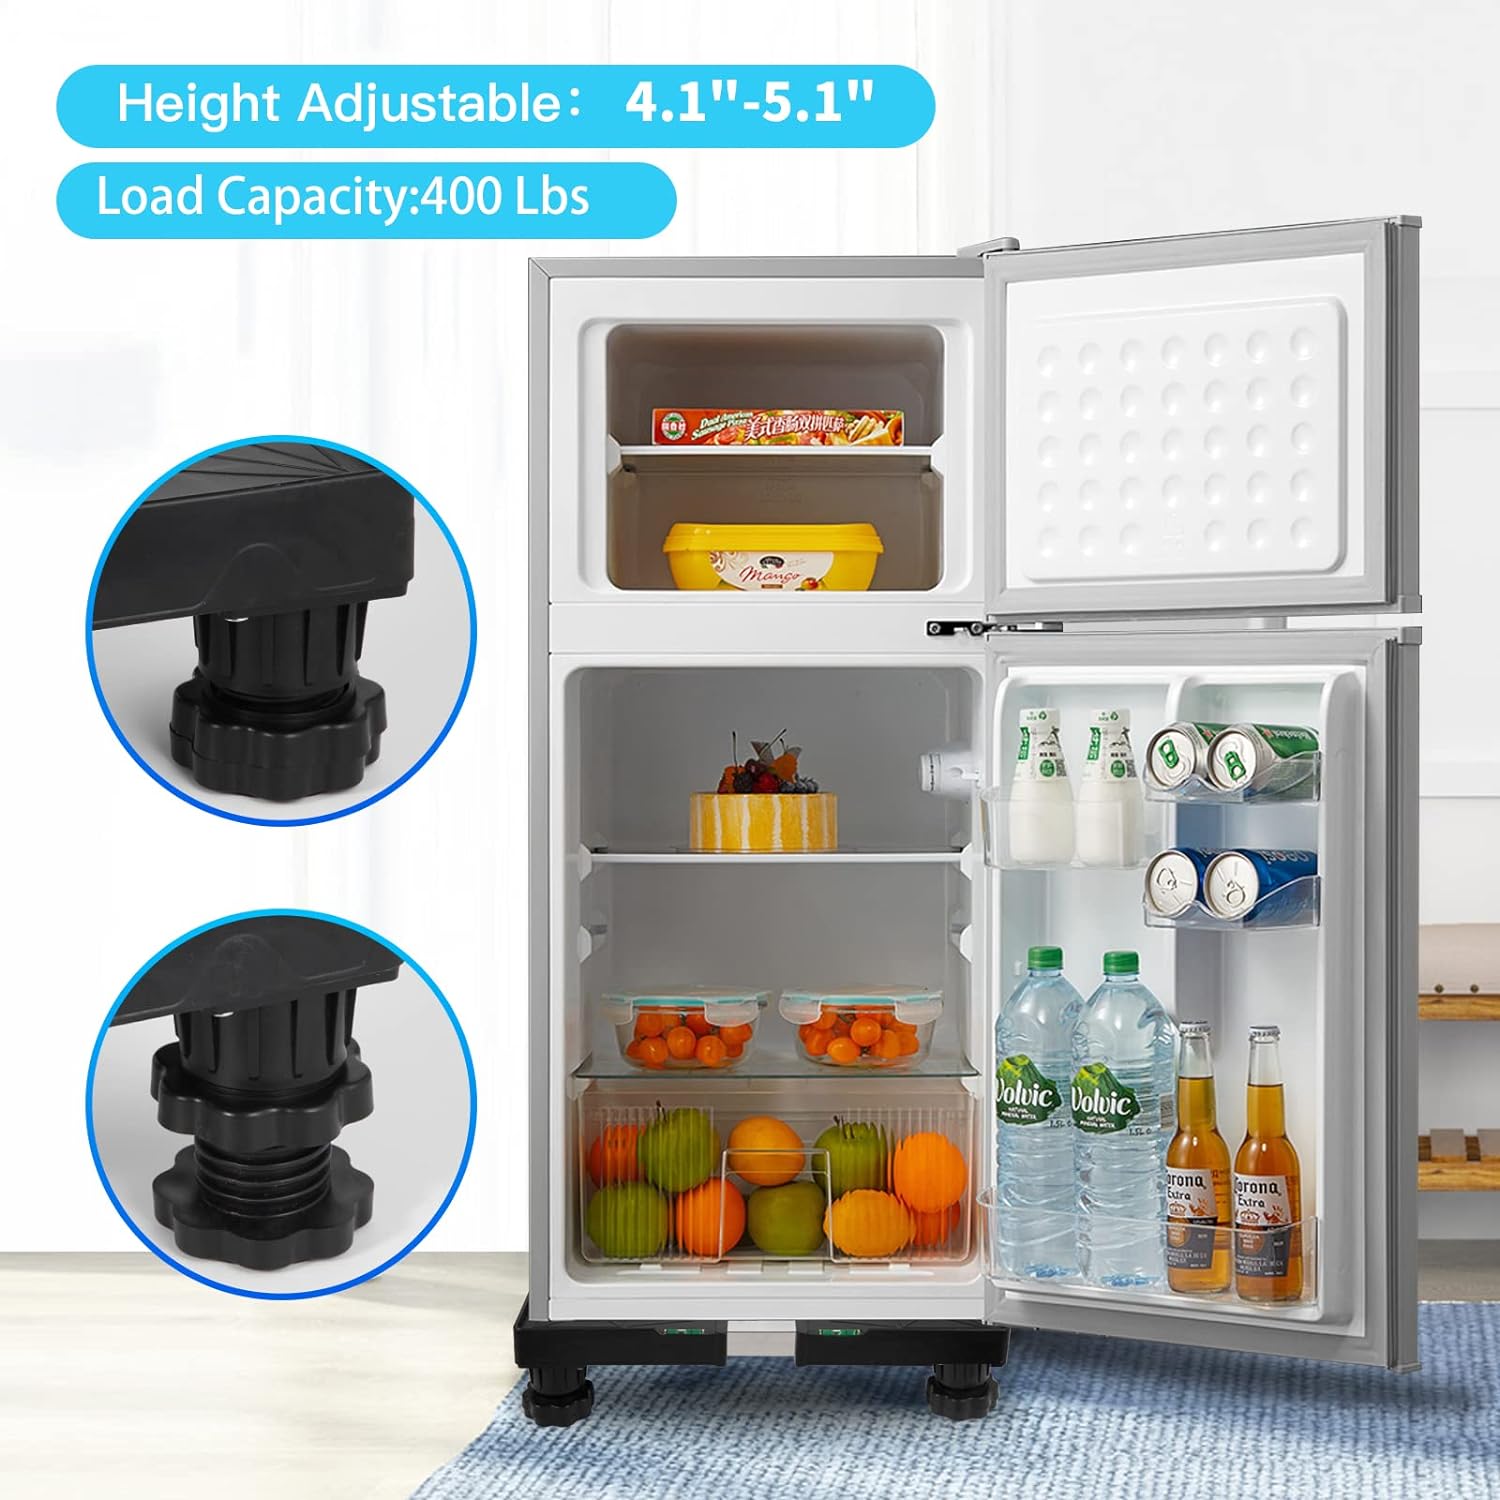 Nefish Mini Fridge Stand Universal Stand Base Adjustable Refrigerator Stand with 4 Strong Feet Washing Machine Pedestal Multi-Functional Base for Dryer (Black)